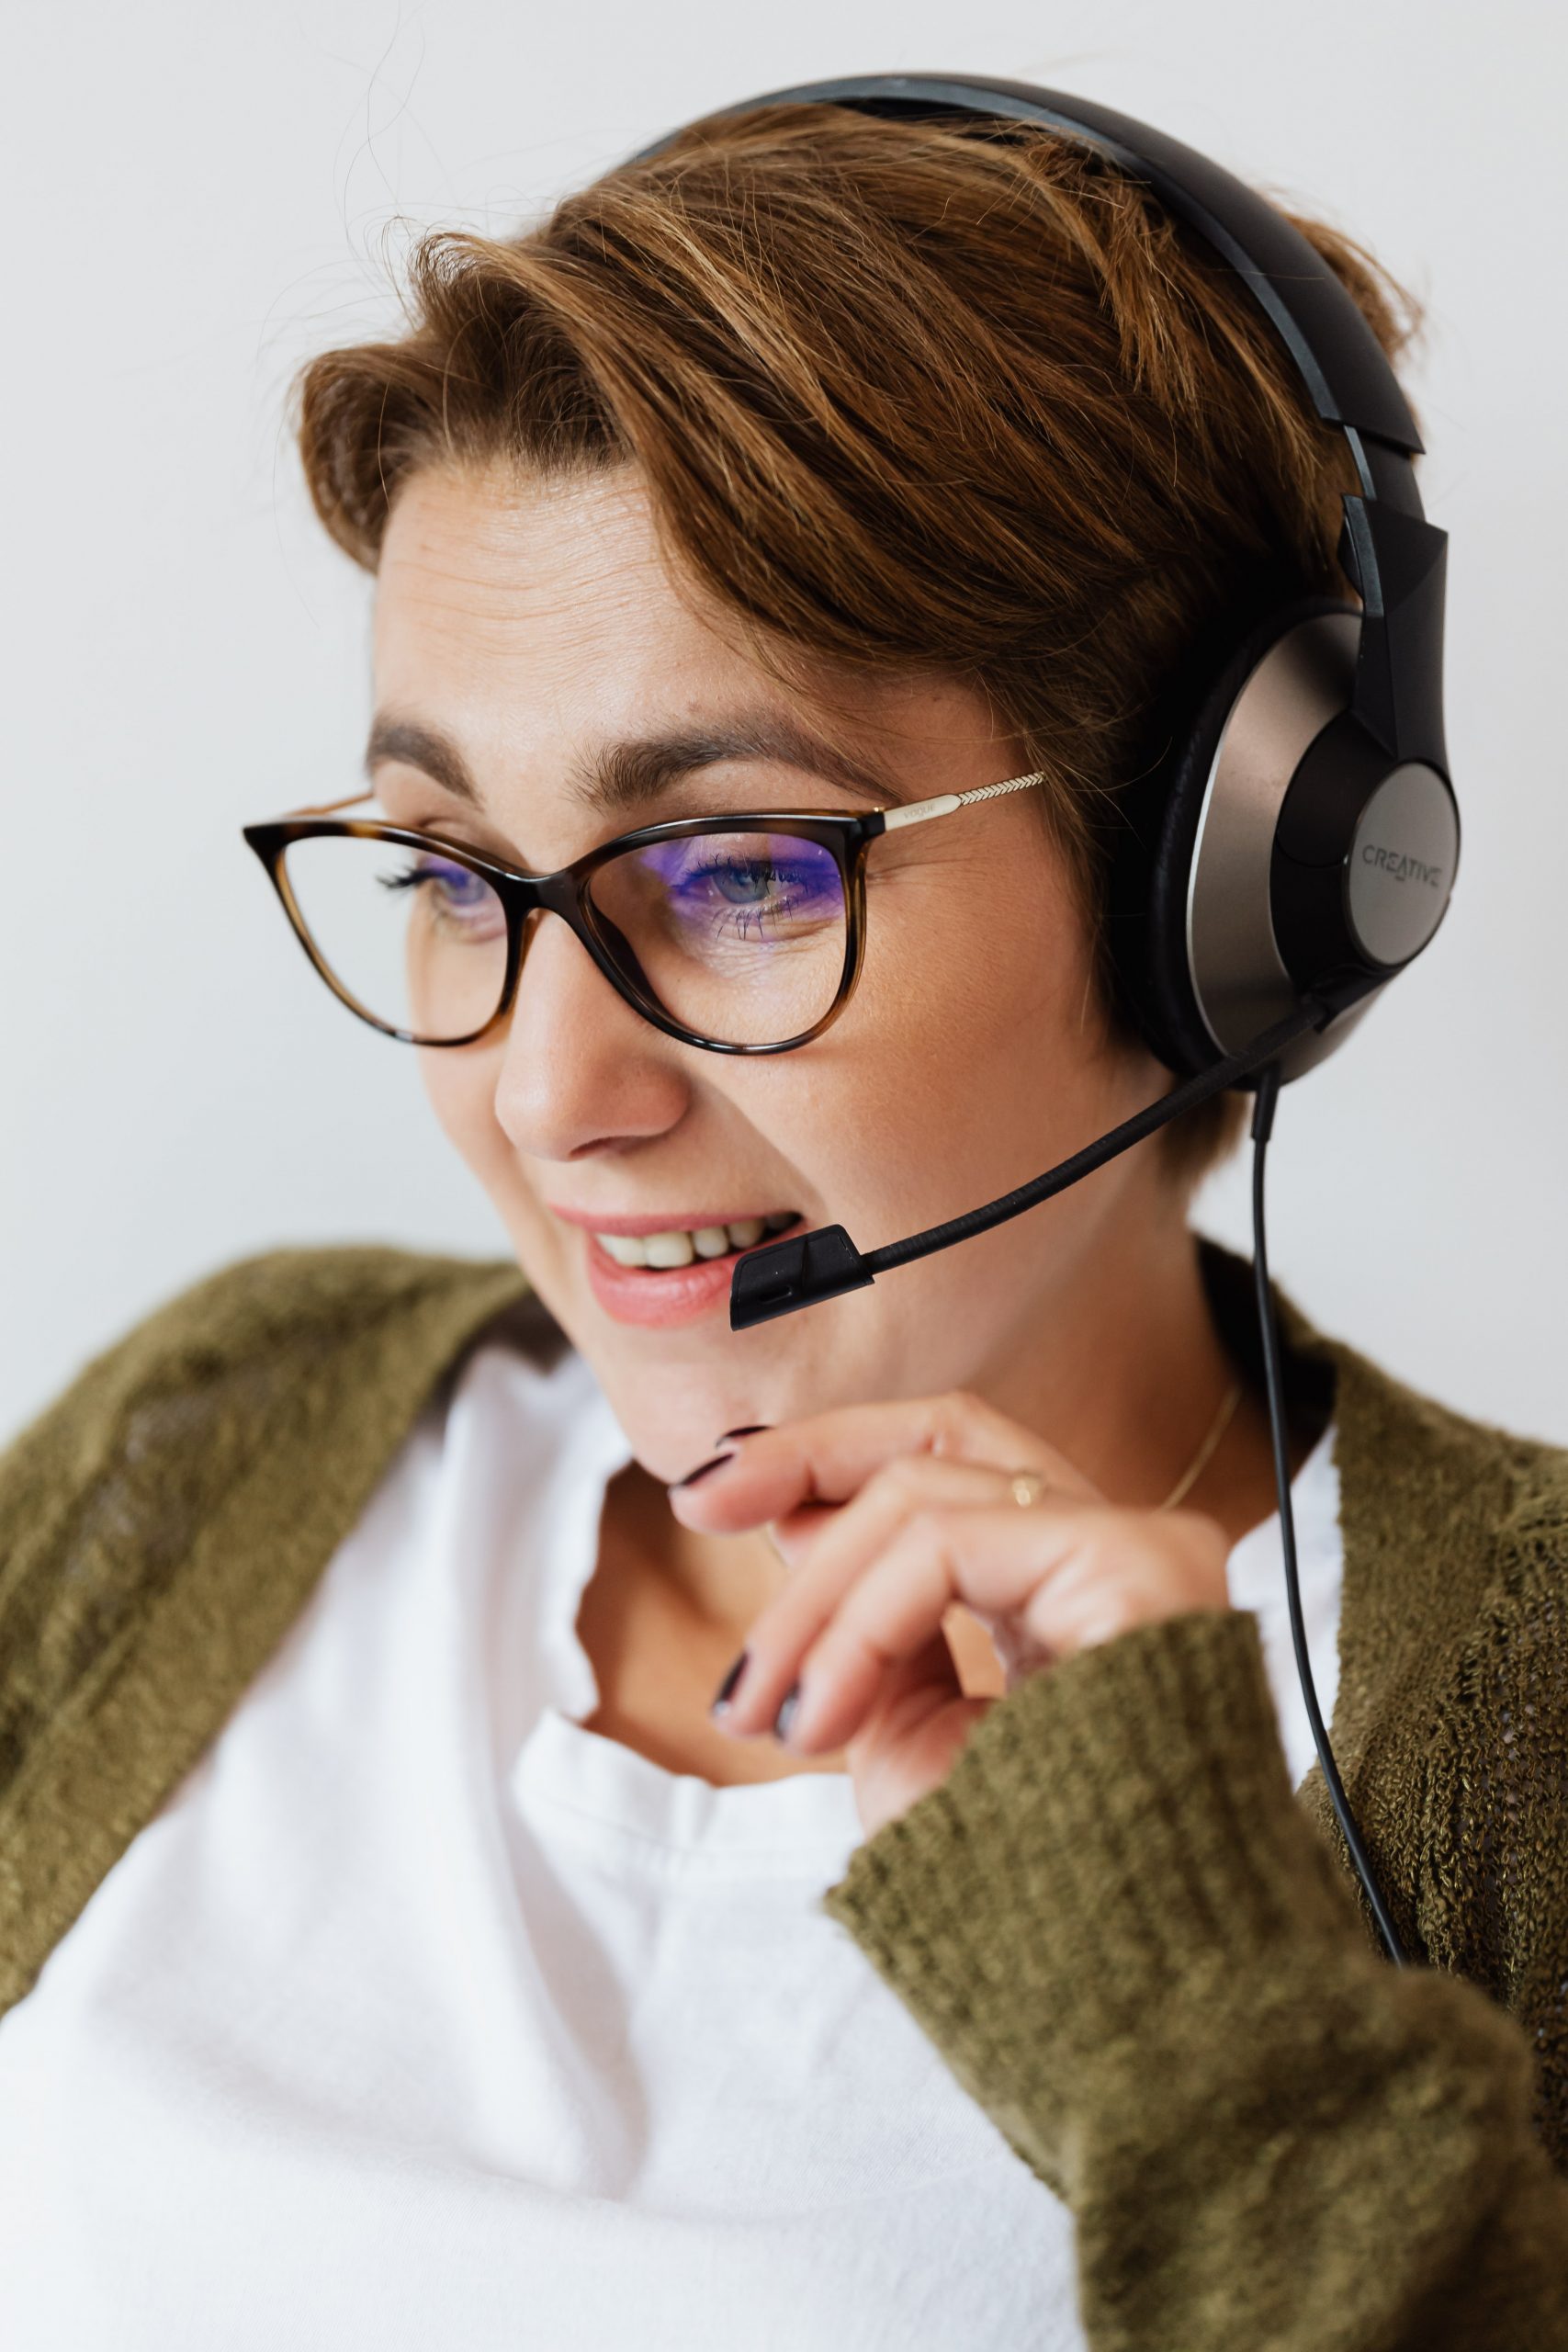 Telemarketing Compliance Policies